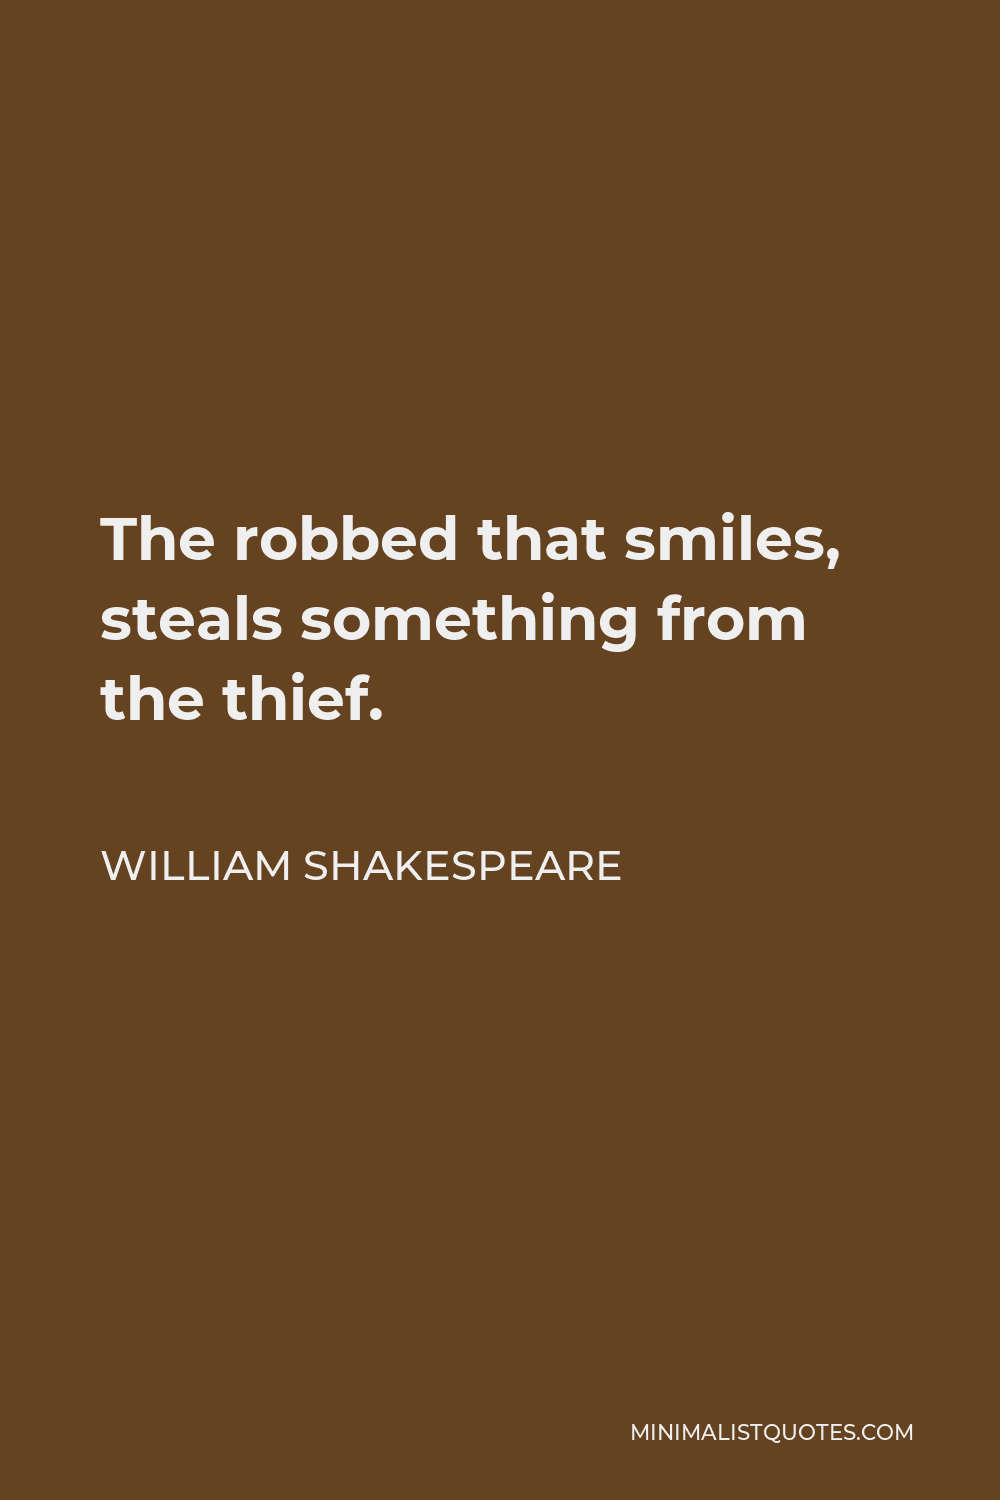 William Shakespeare Quote - The robbed that smiles, steals something from the thief.